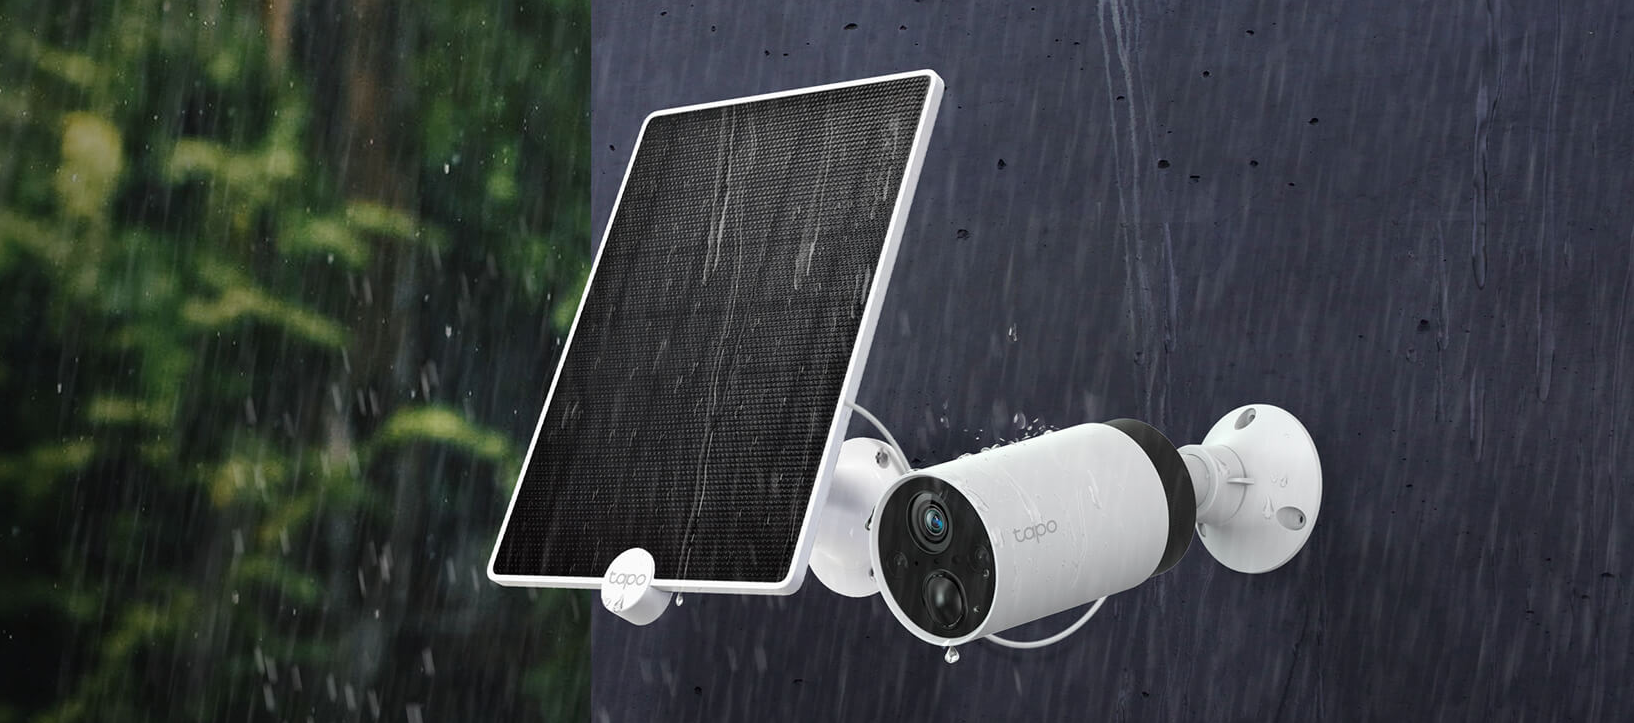 IP65 Weatherproof
Offers reliable performance and keeps your battery cameras stay charged even in harsh environments with rain and dust.